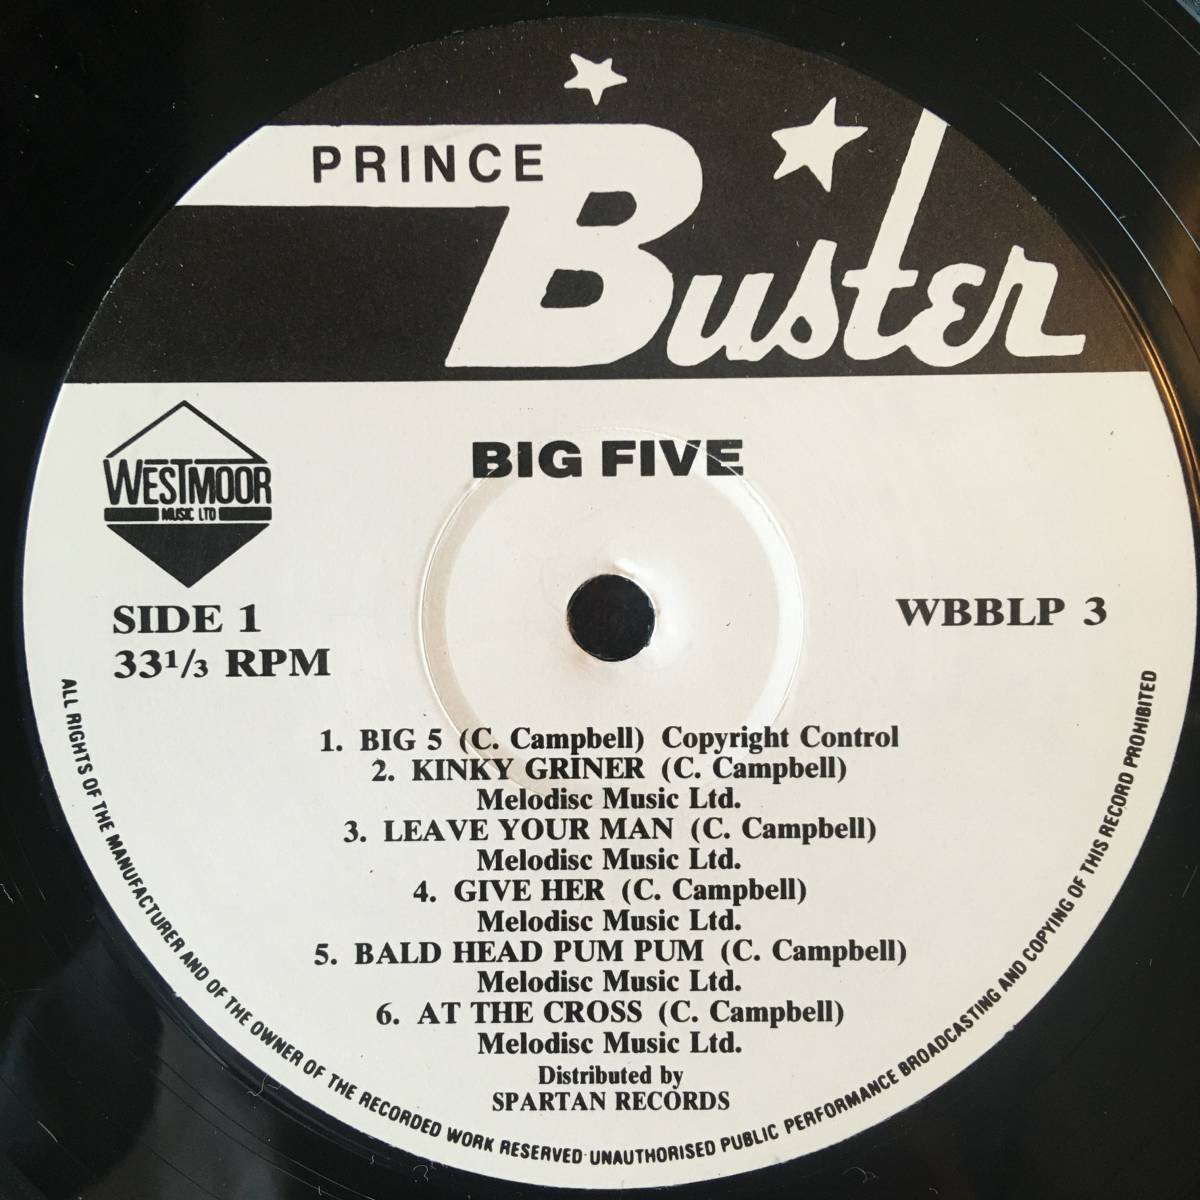 Prince Buster / Big Five [Prince Buster - WBBLP 3, Westmoor Music Ltd - WBBLP 3]の画像3